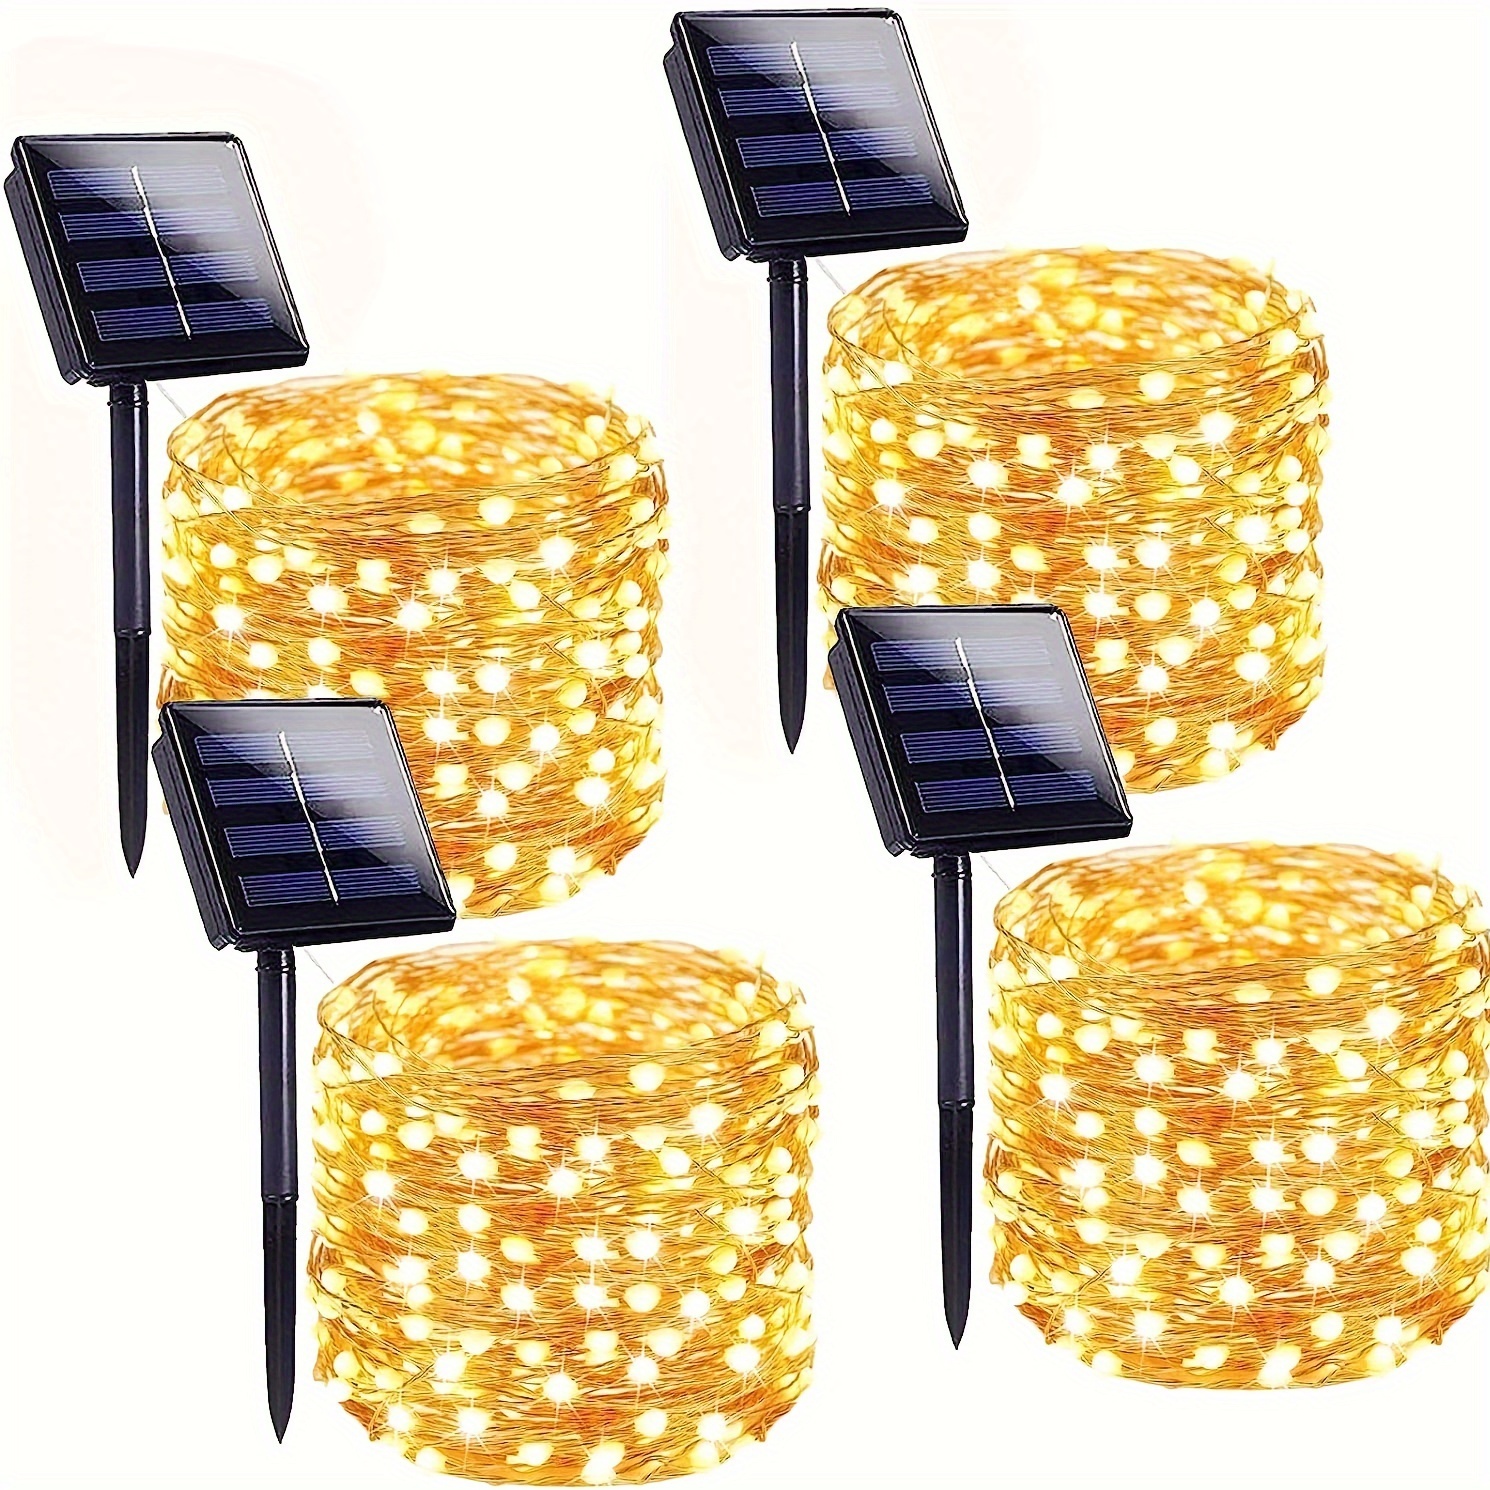 

Solar String Lights Outdoor, 4-pack Total 400 Led Solar Christmas Twinkle Lights Outside, Waterproof Copper Wire With 8 Modes Solar Fairy Lights For Garden Yard Tree Wedding Christmas Decor